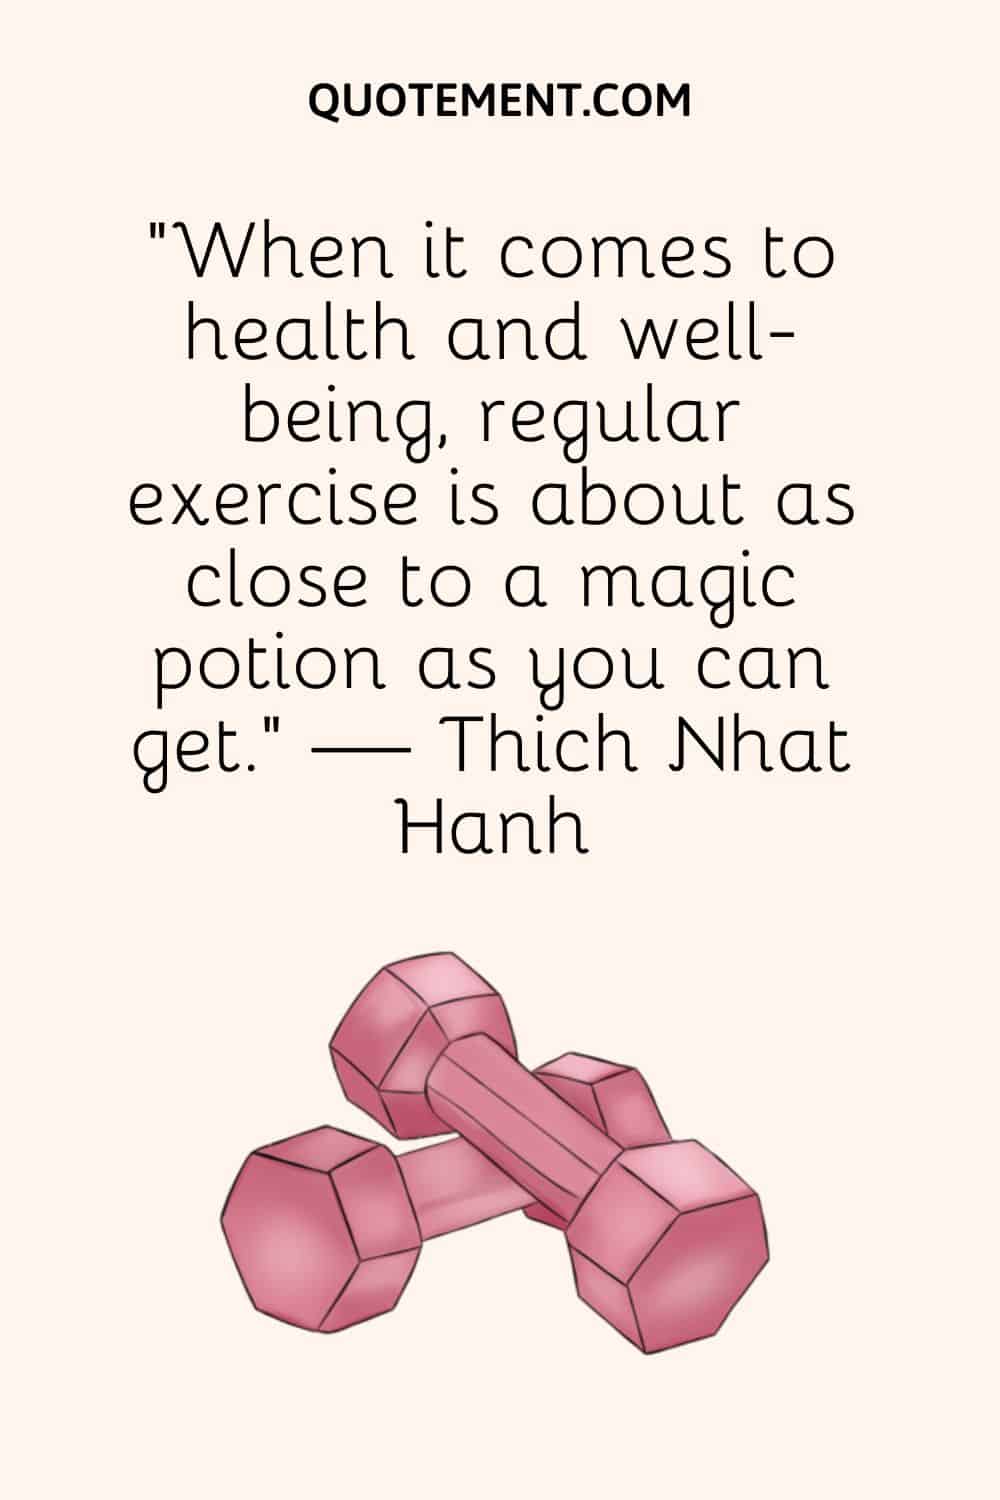 “When it comes to health and well-being, regular exercise is about as close to a magic potion as you can get.” — Thich Nhat Hanh